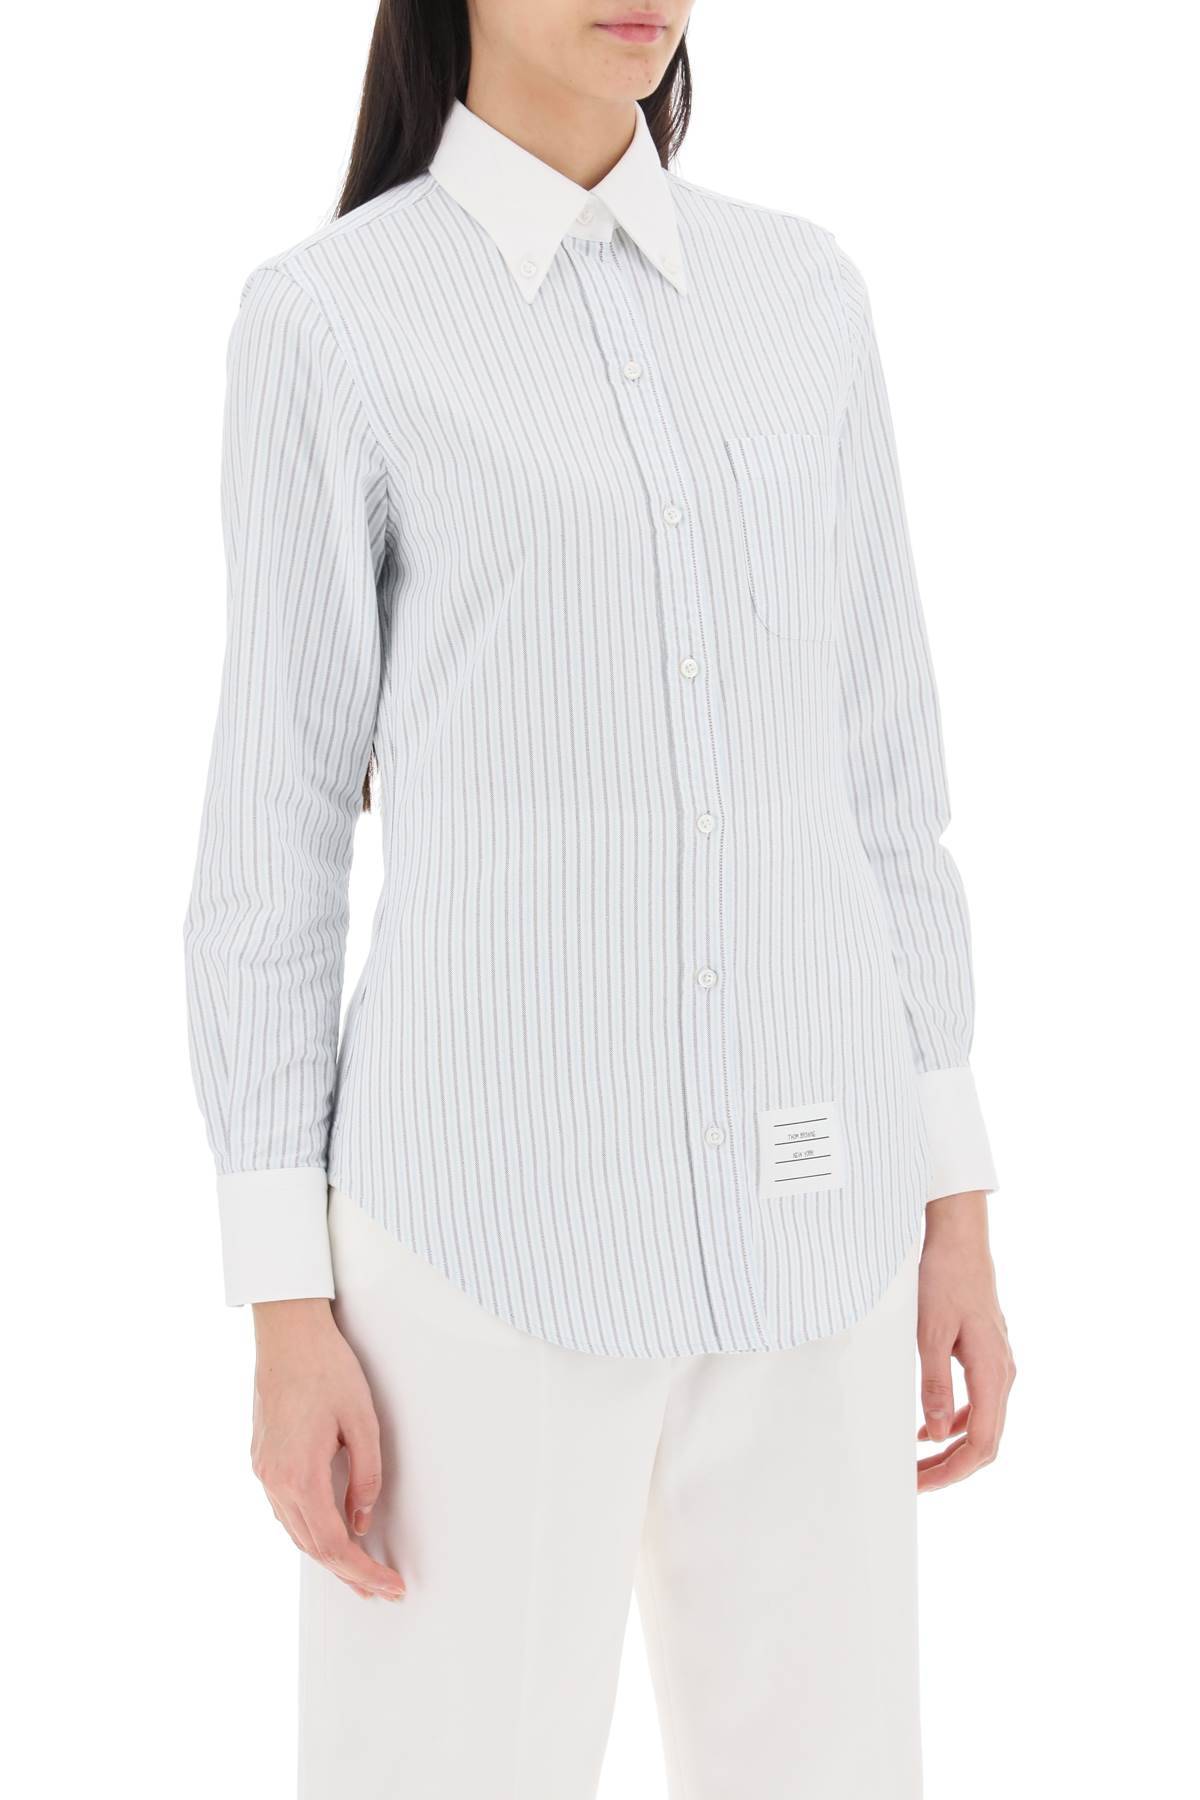 Shop Thom Browne Striped Oxford Shirt In White,light Blue